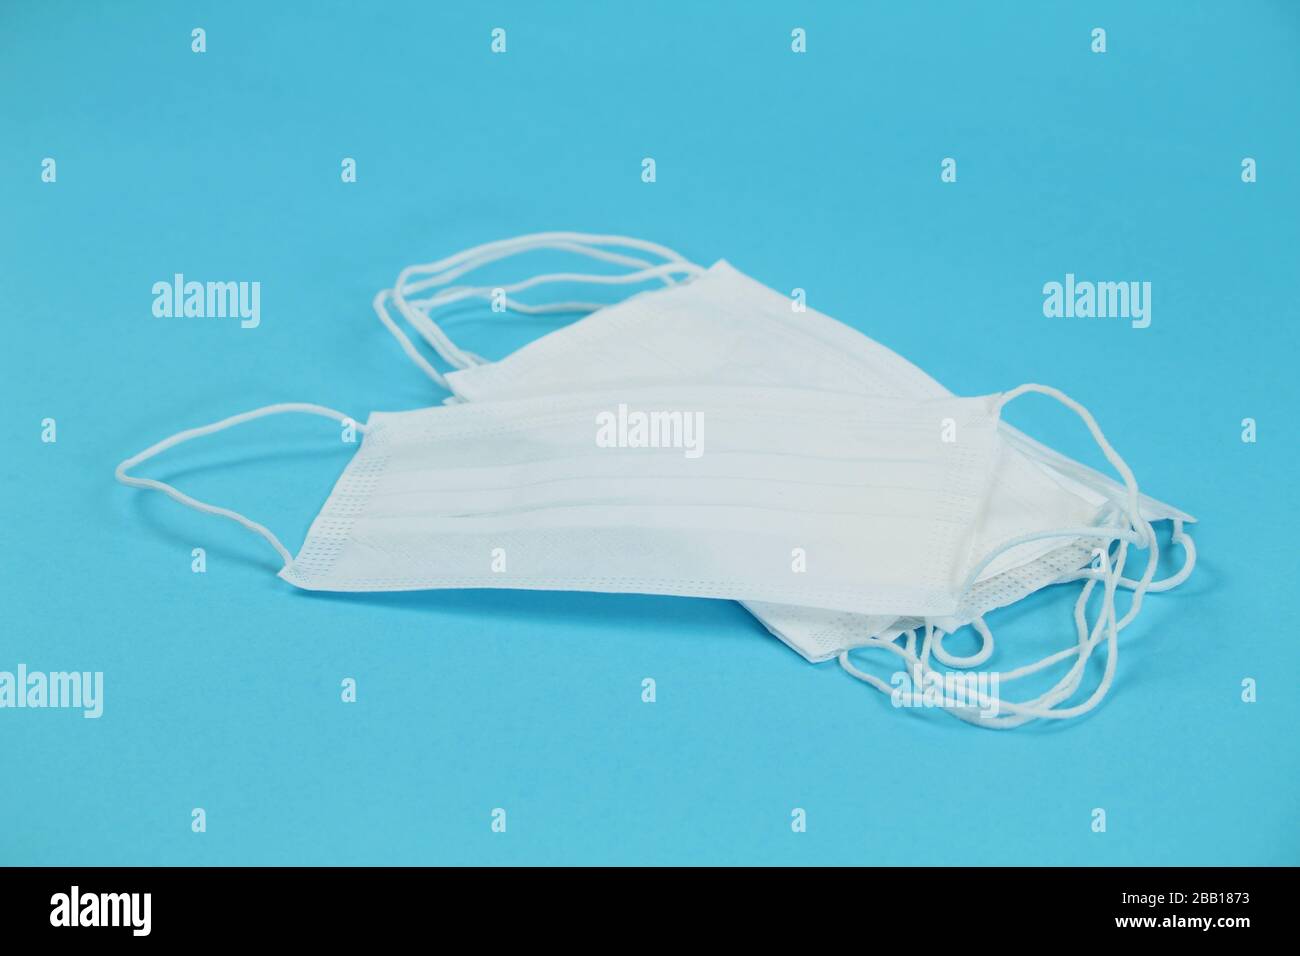 Disposable Medical masks on blue background. Covid-19 and healthcare concept Stock Photo